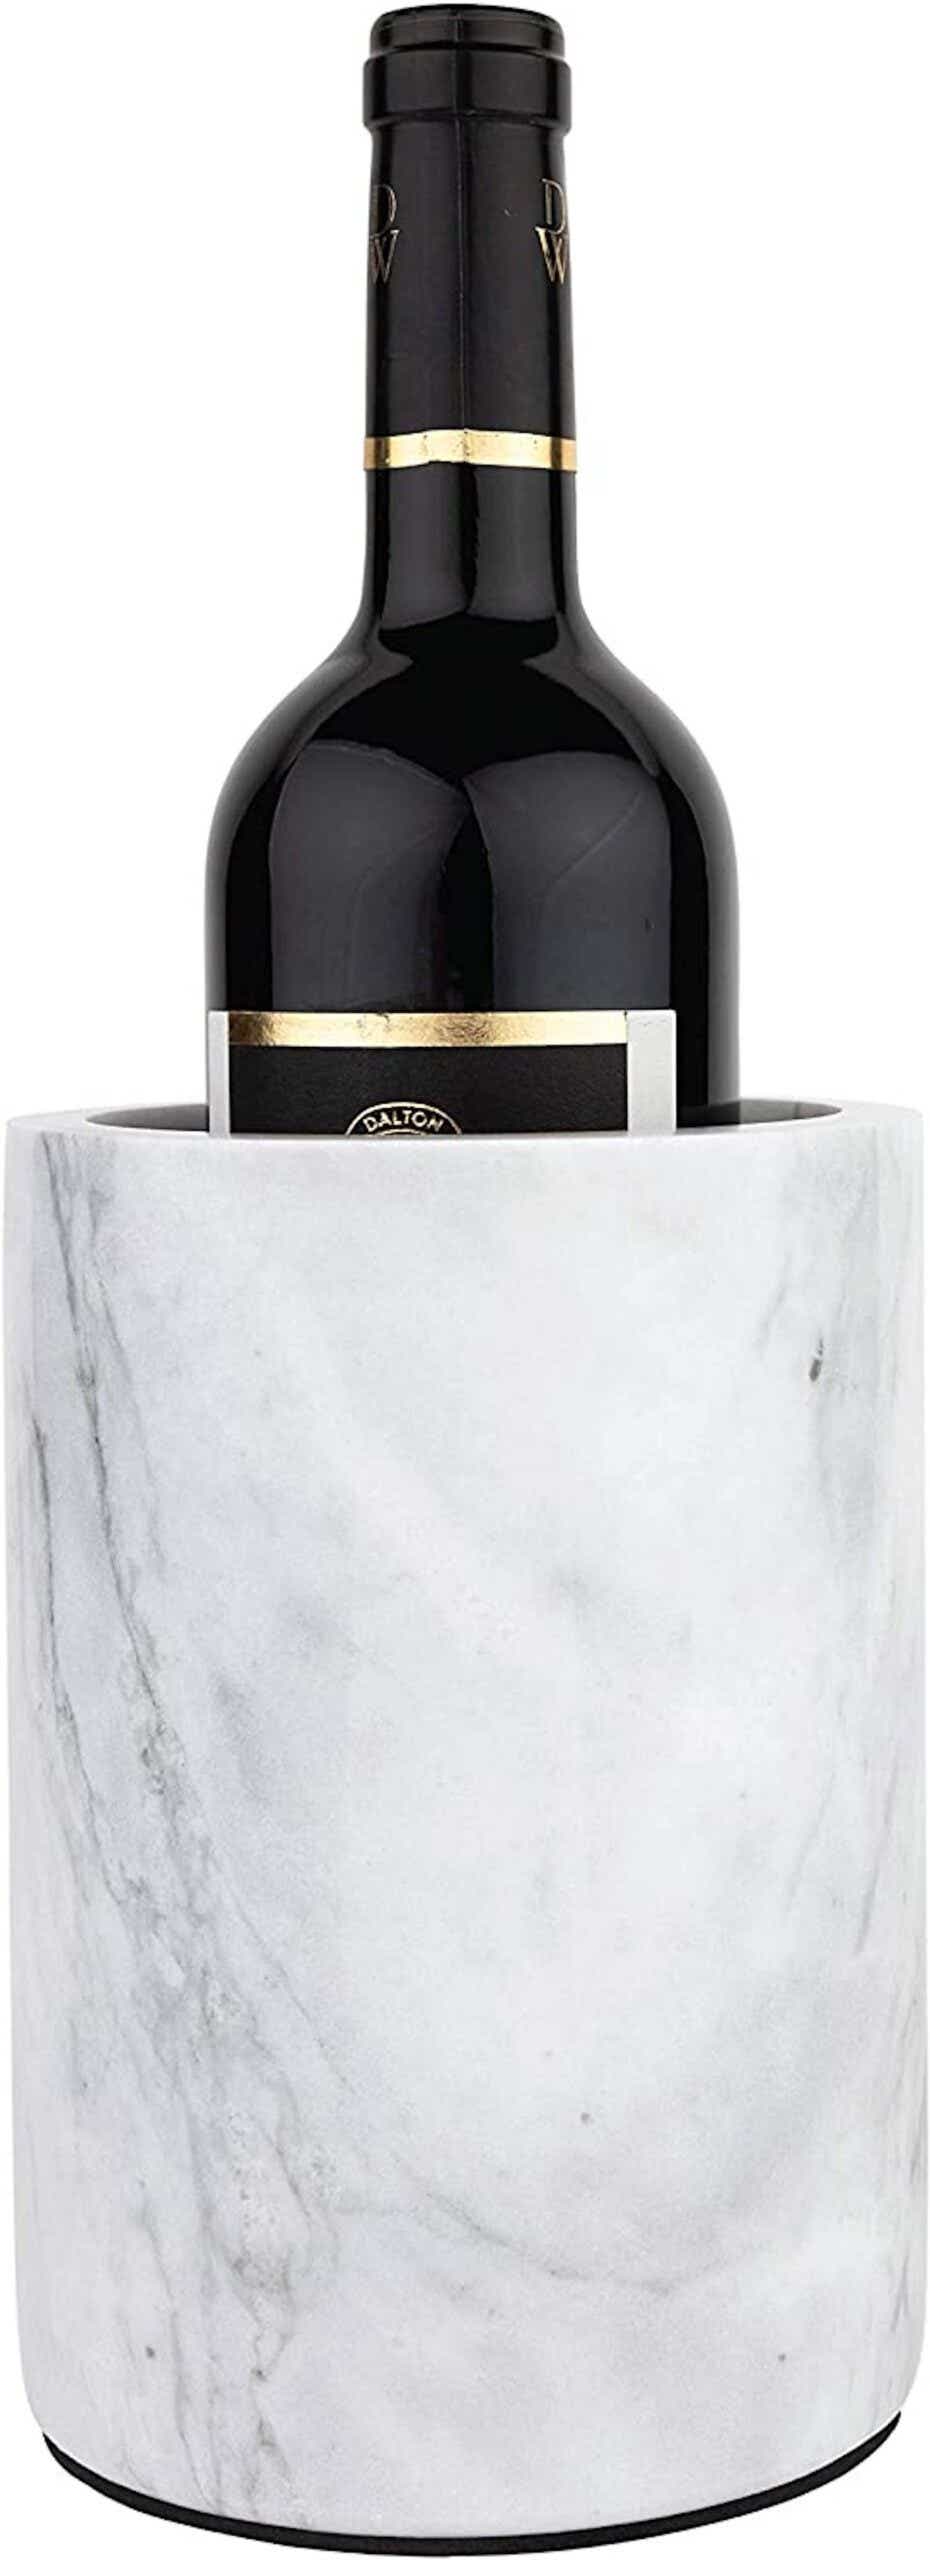 A bottle of wine stands in a cylindrical white marble bucket.